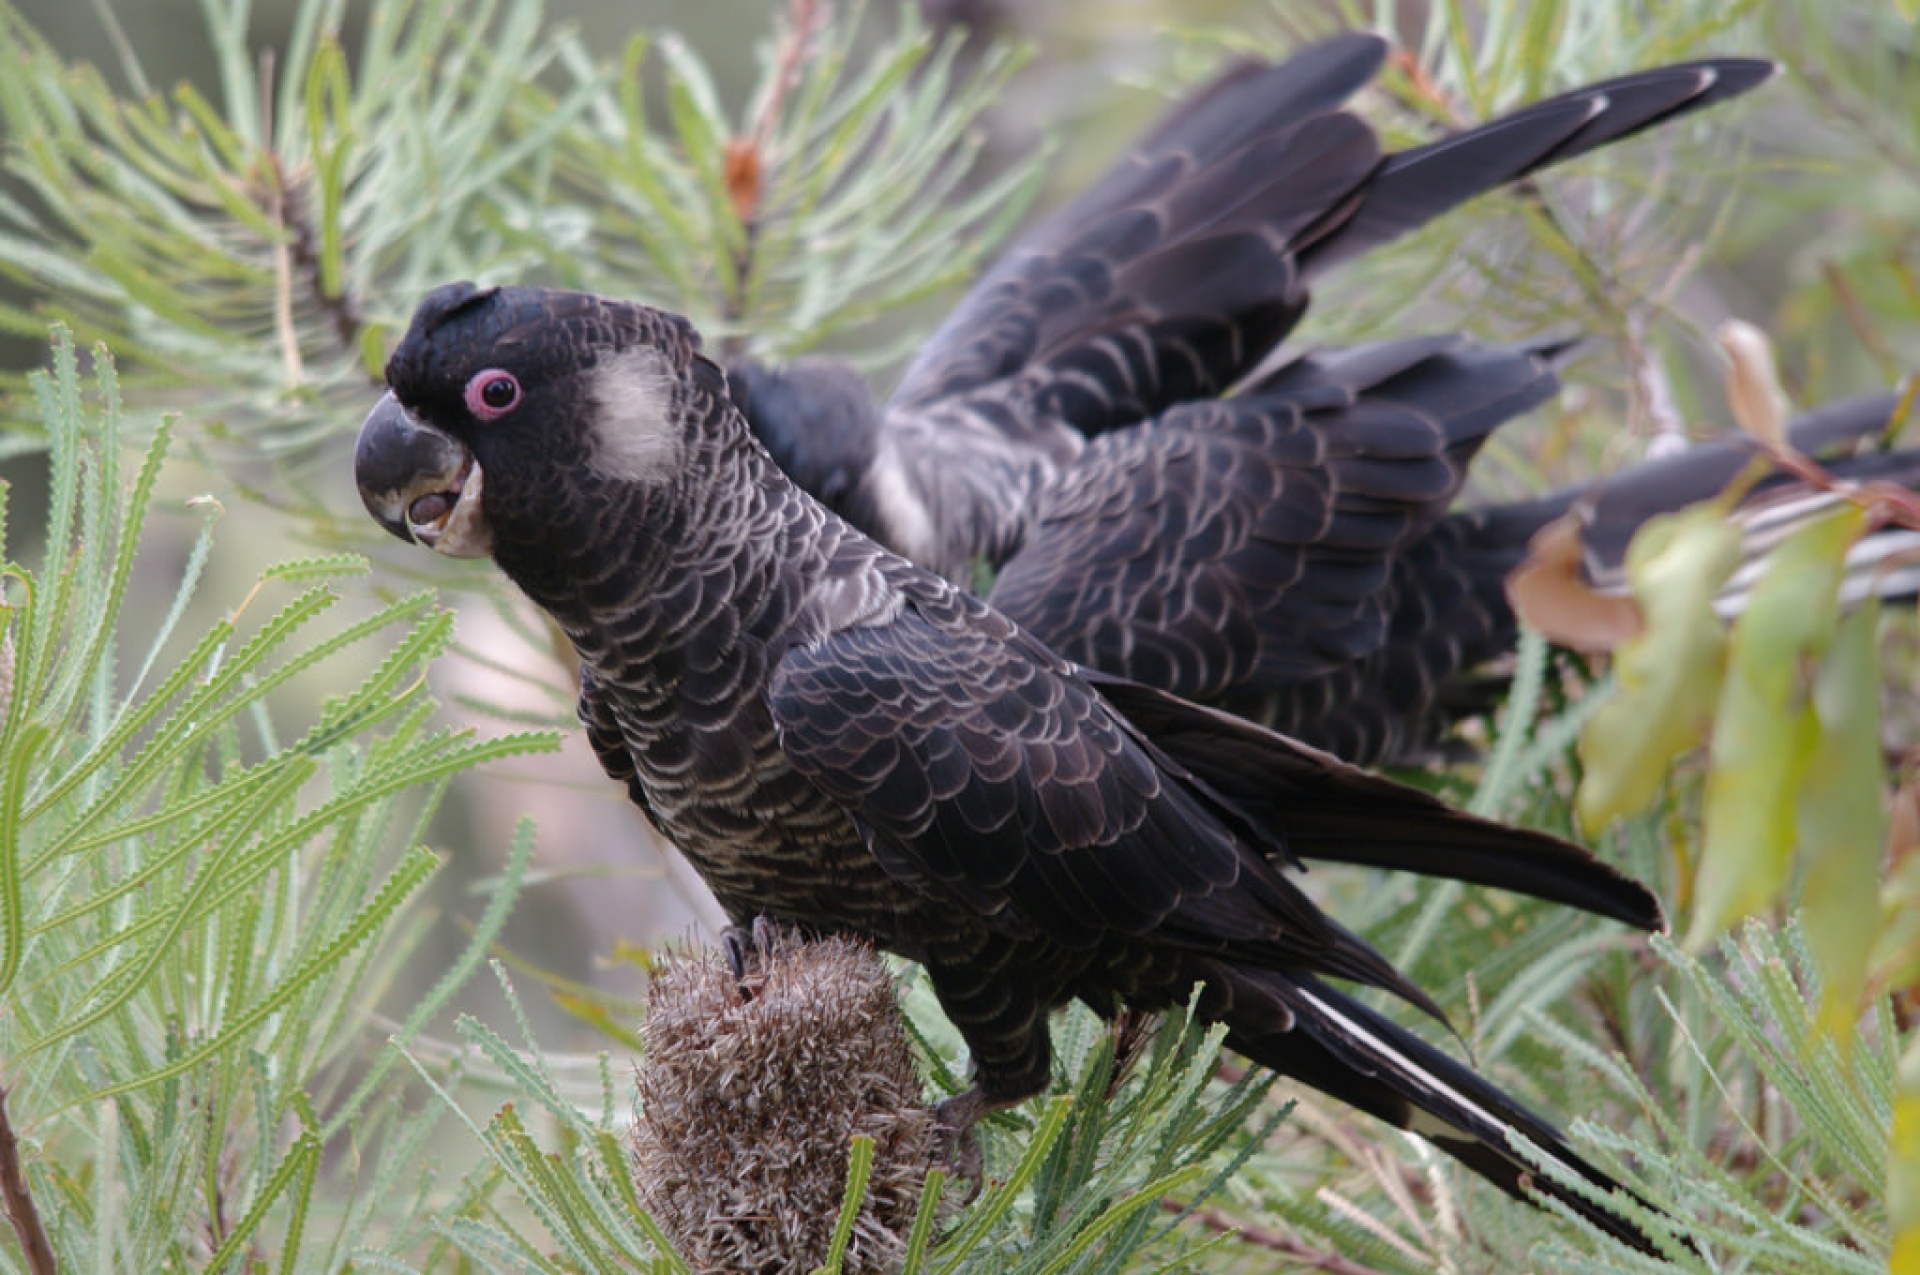 Black Cockatoo Conservation Efforts Receive Funding Boost